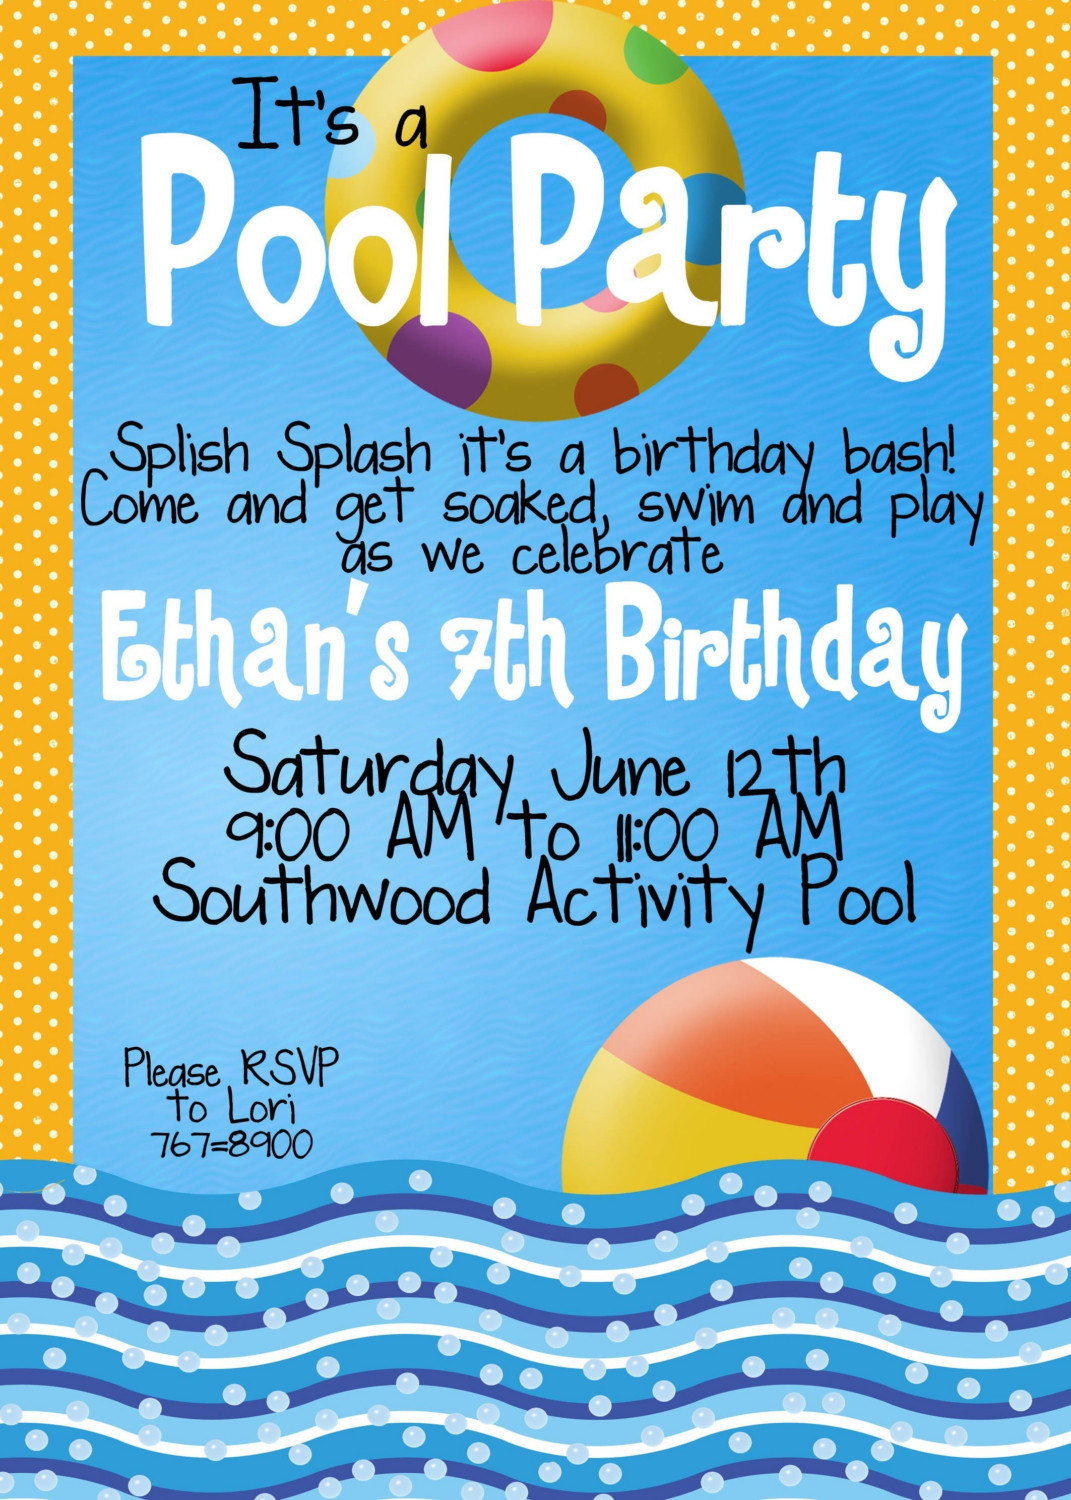 Pool Party Invitations Ideas
 Pool Party Invitations by MagicbyMarcy on Etsy